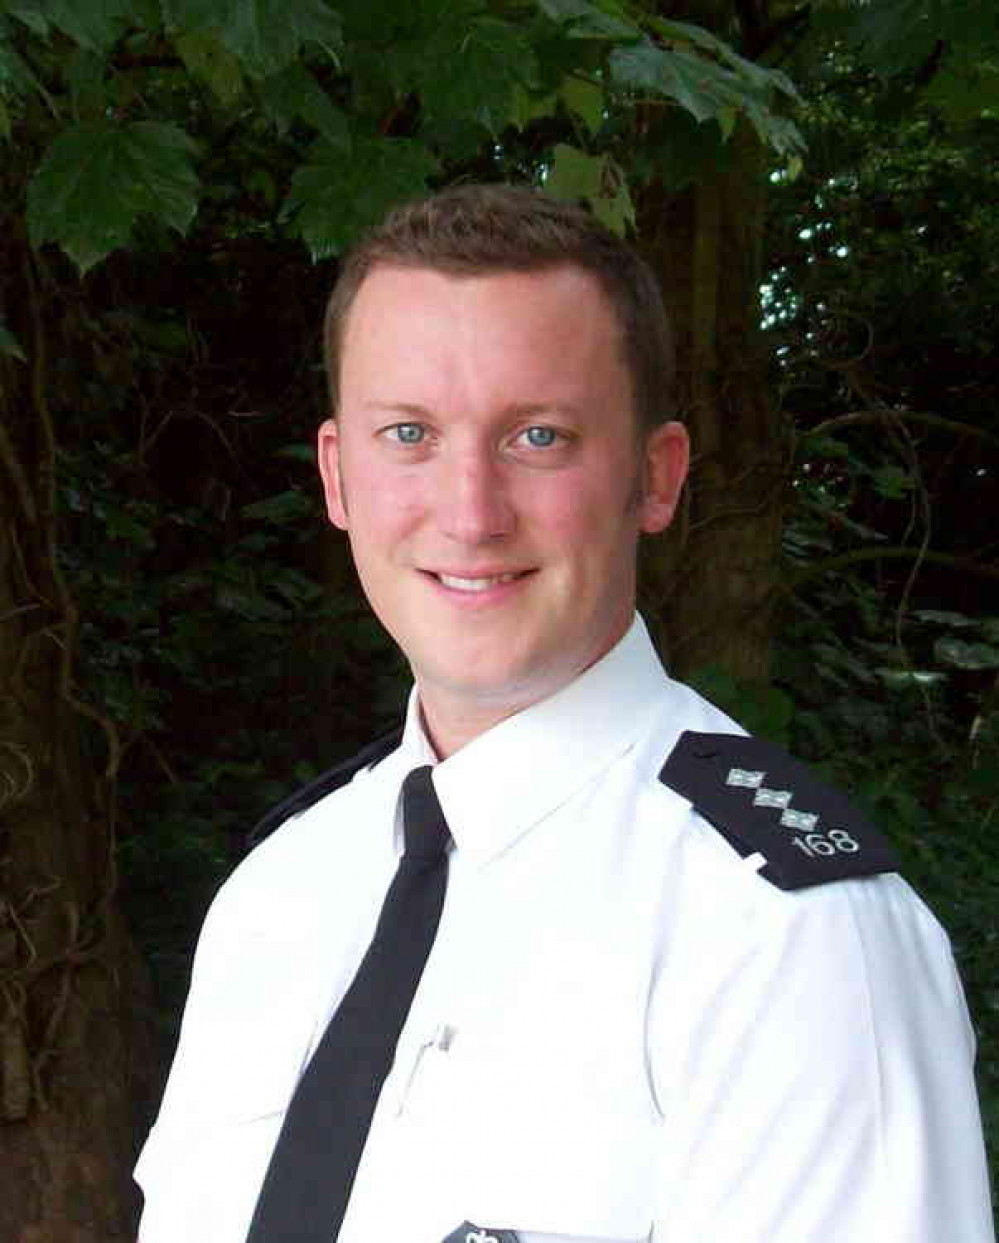 Thurrocks New Top Cop Tells Of Aim To Tackle Gangs And Violence Local News News Thurrock 0508